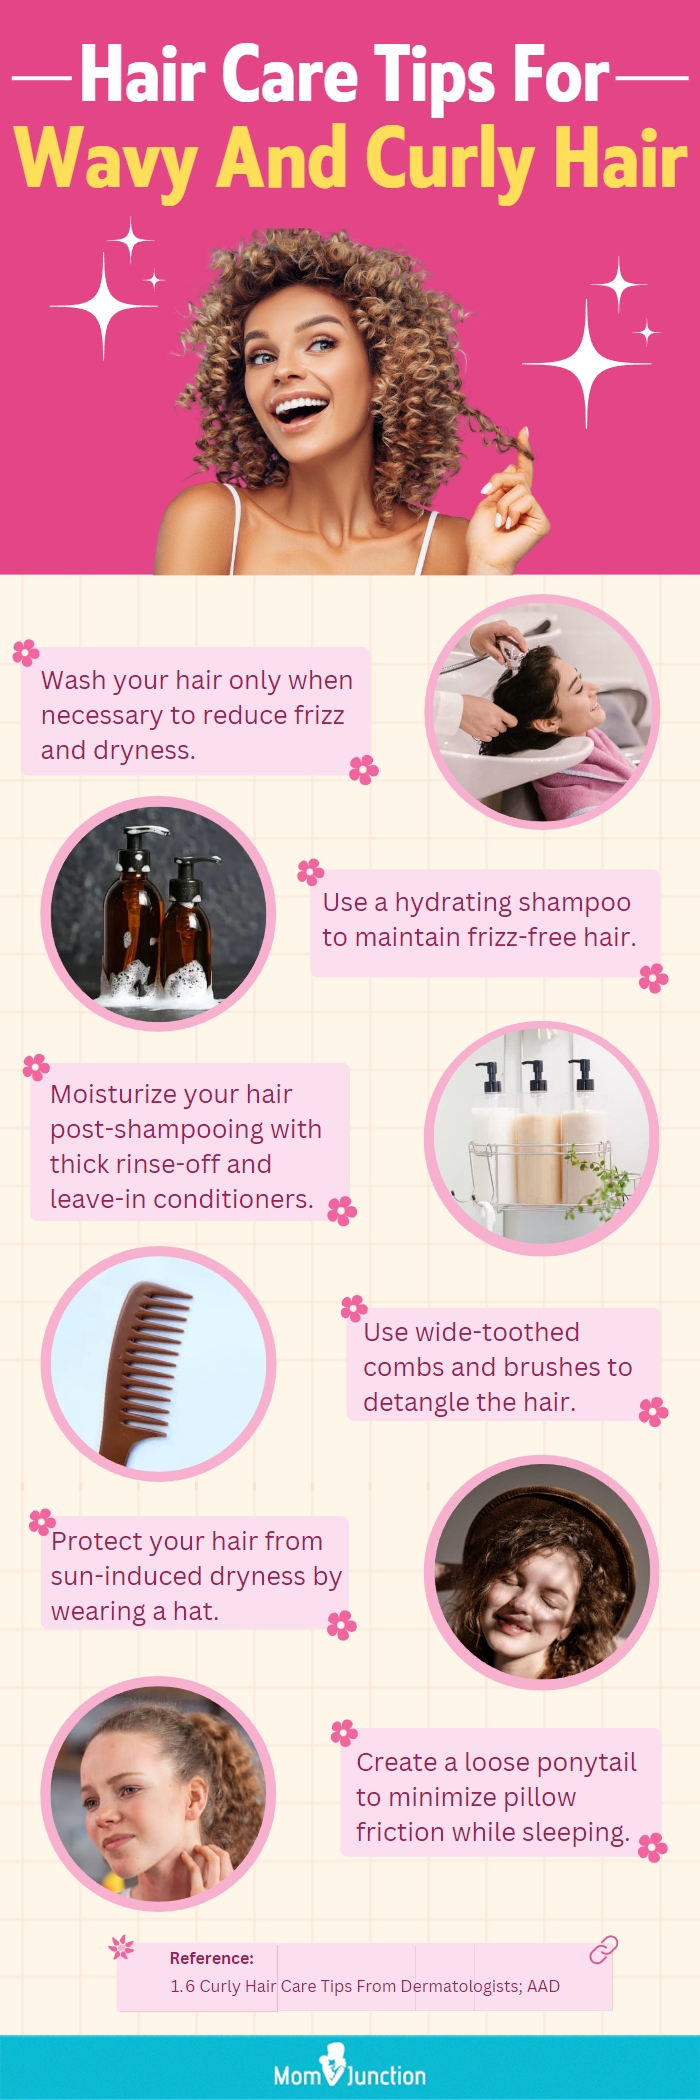 Hair Care Tips For Wavy And Curly Hair (infographic)